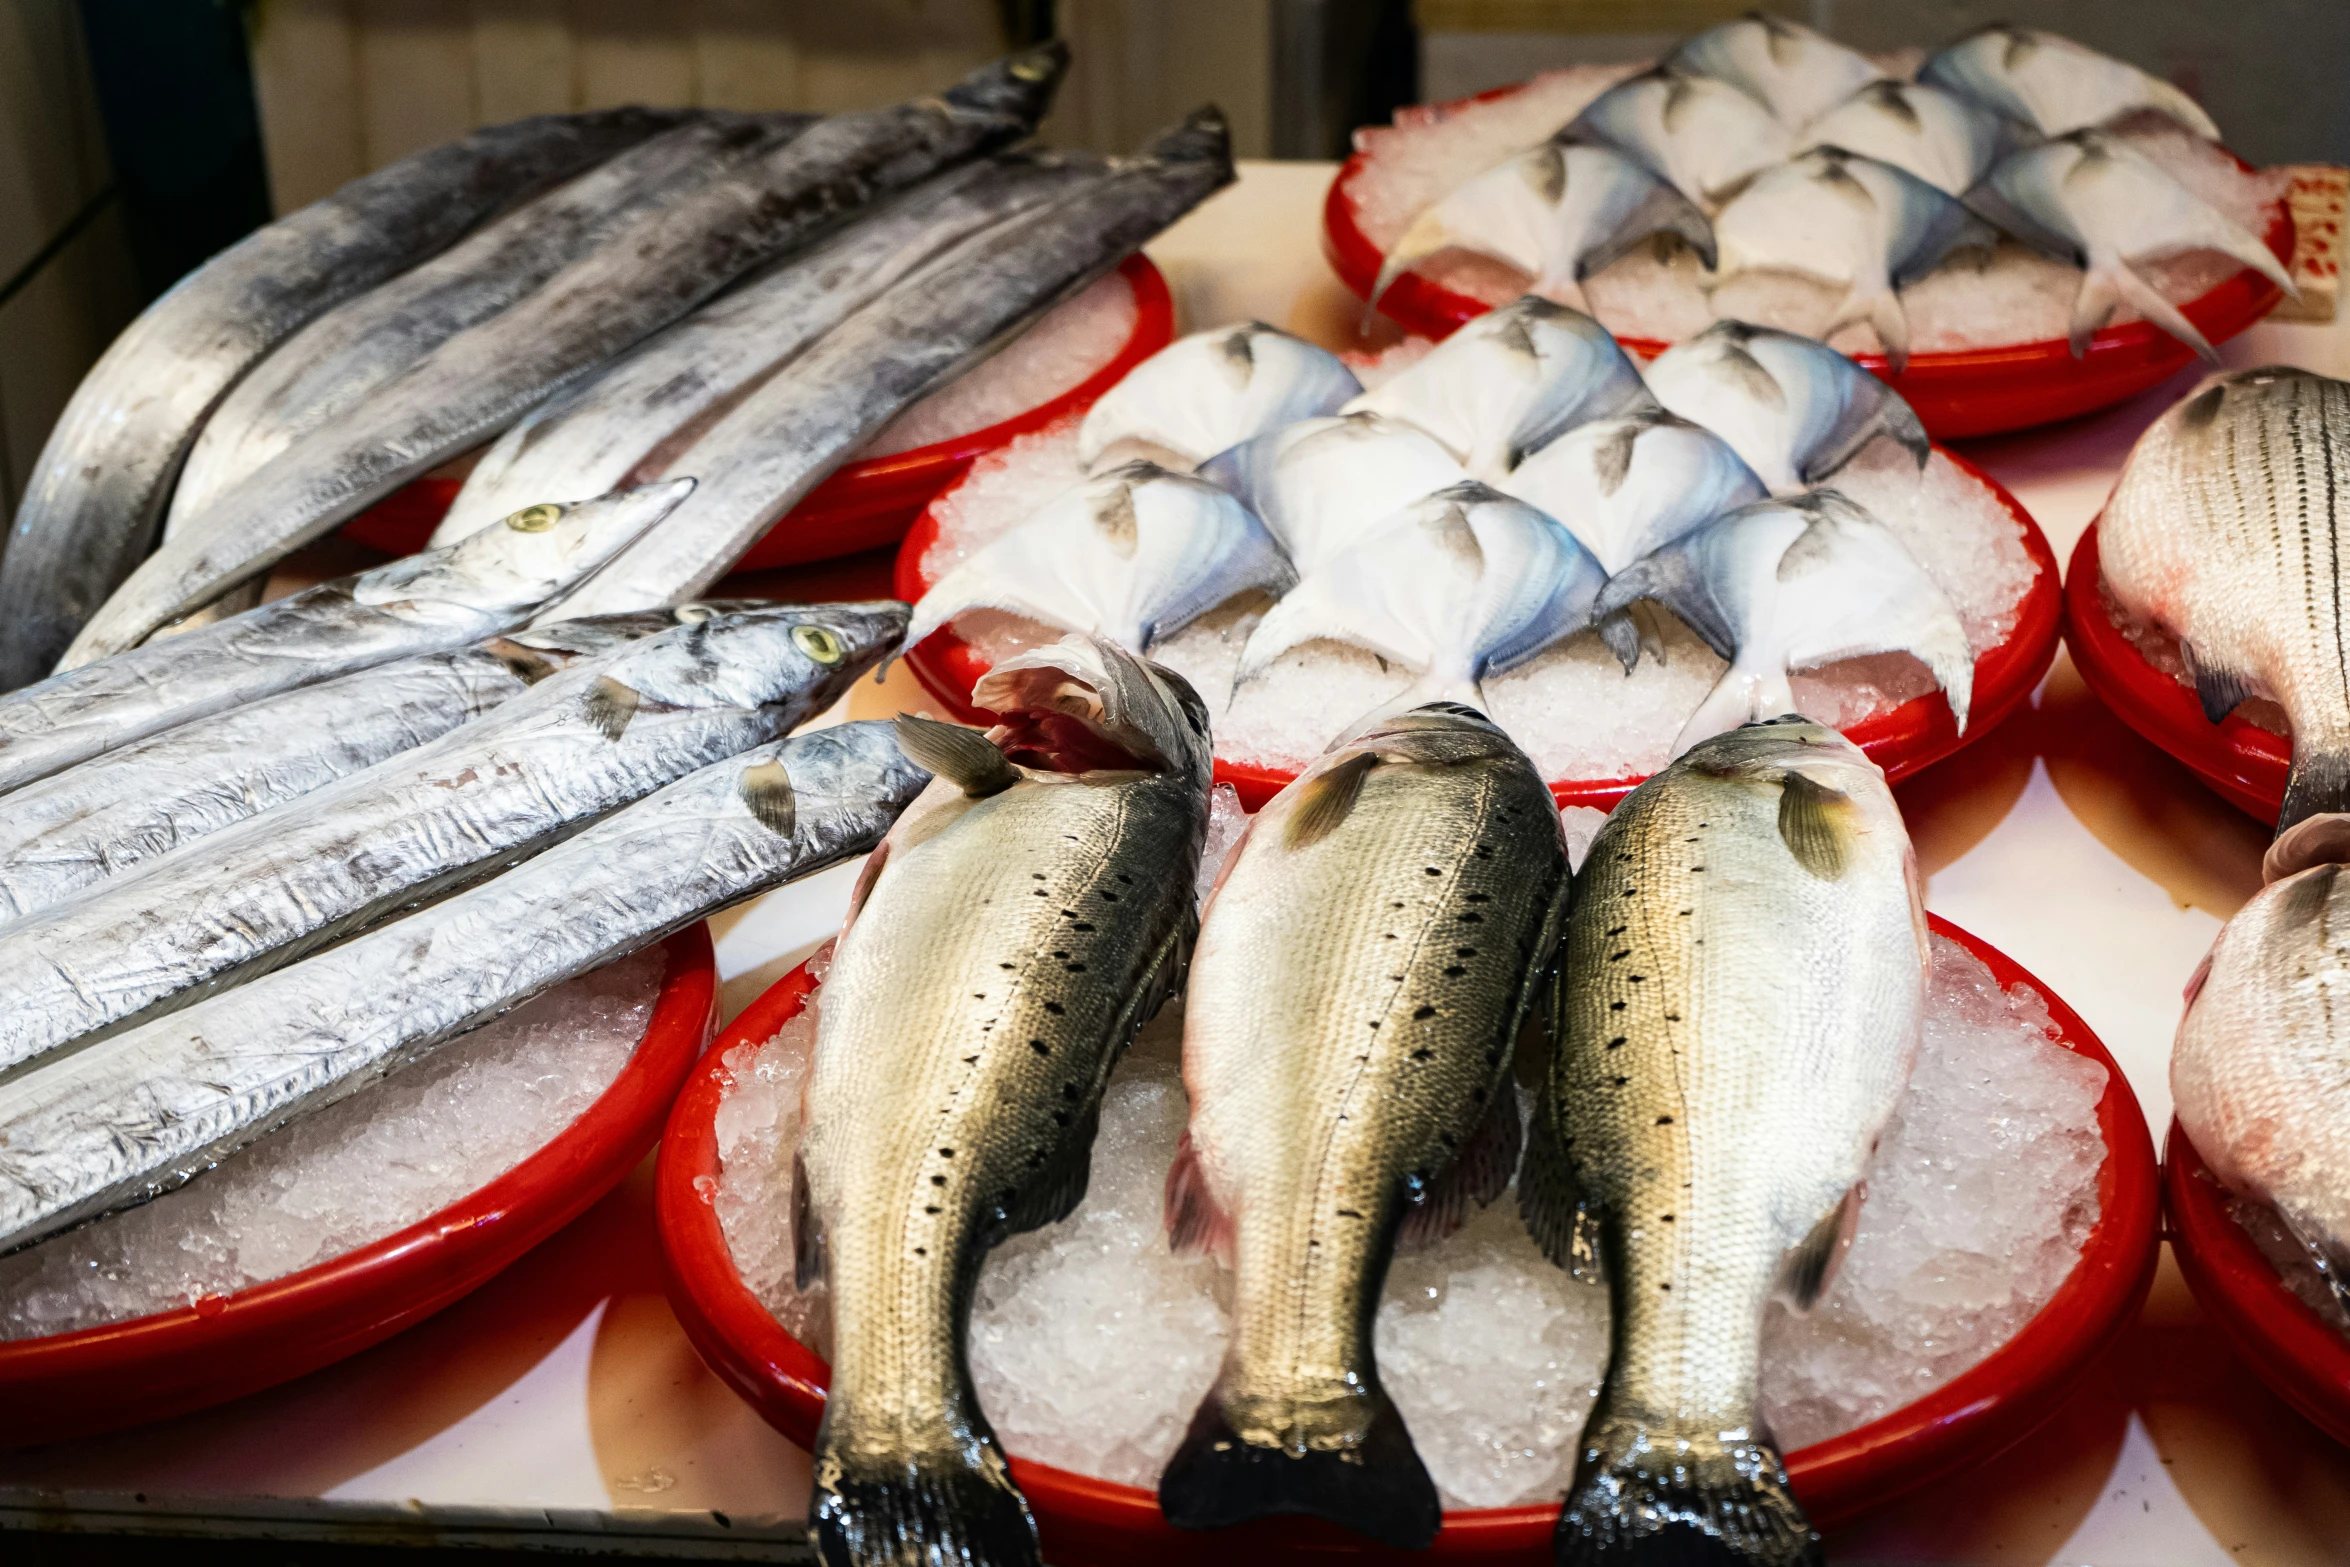 fresh fish are on display in red bowls